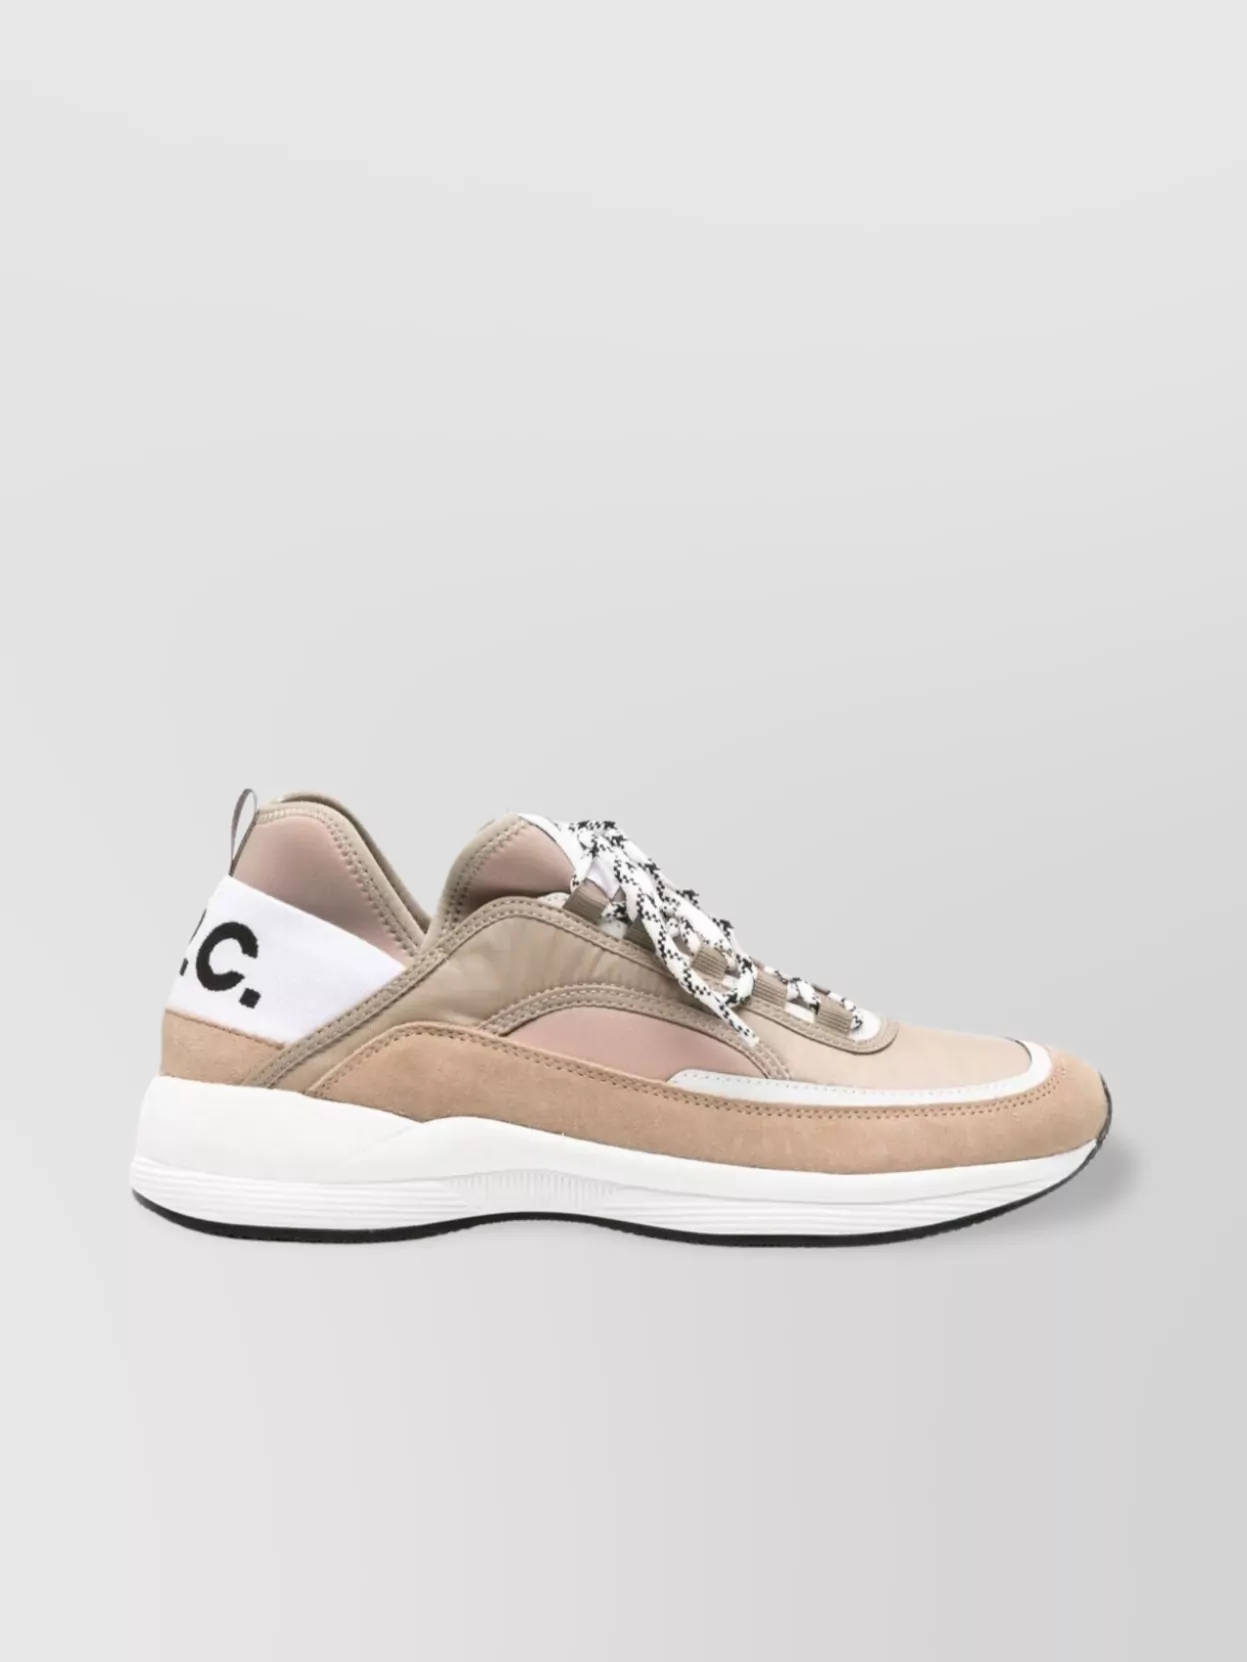 APC DYNAMIC LEATHER RUNNING SHOES